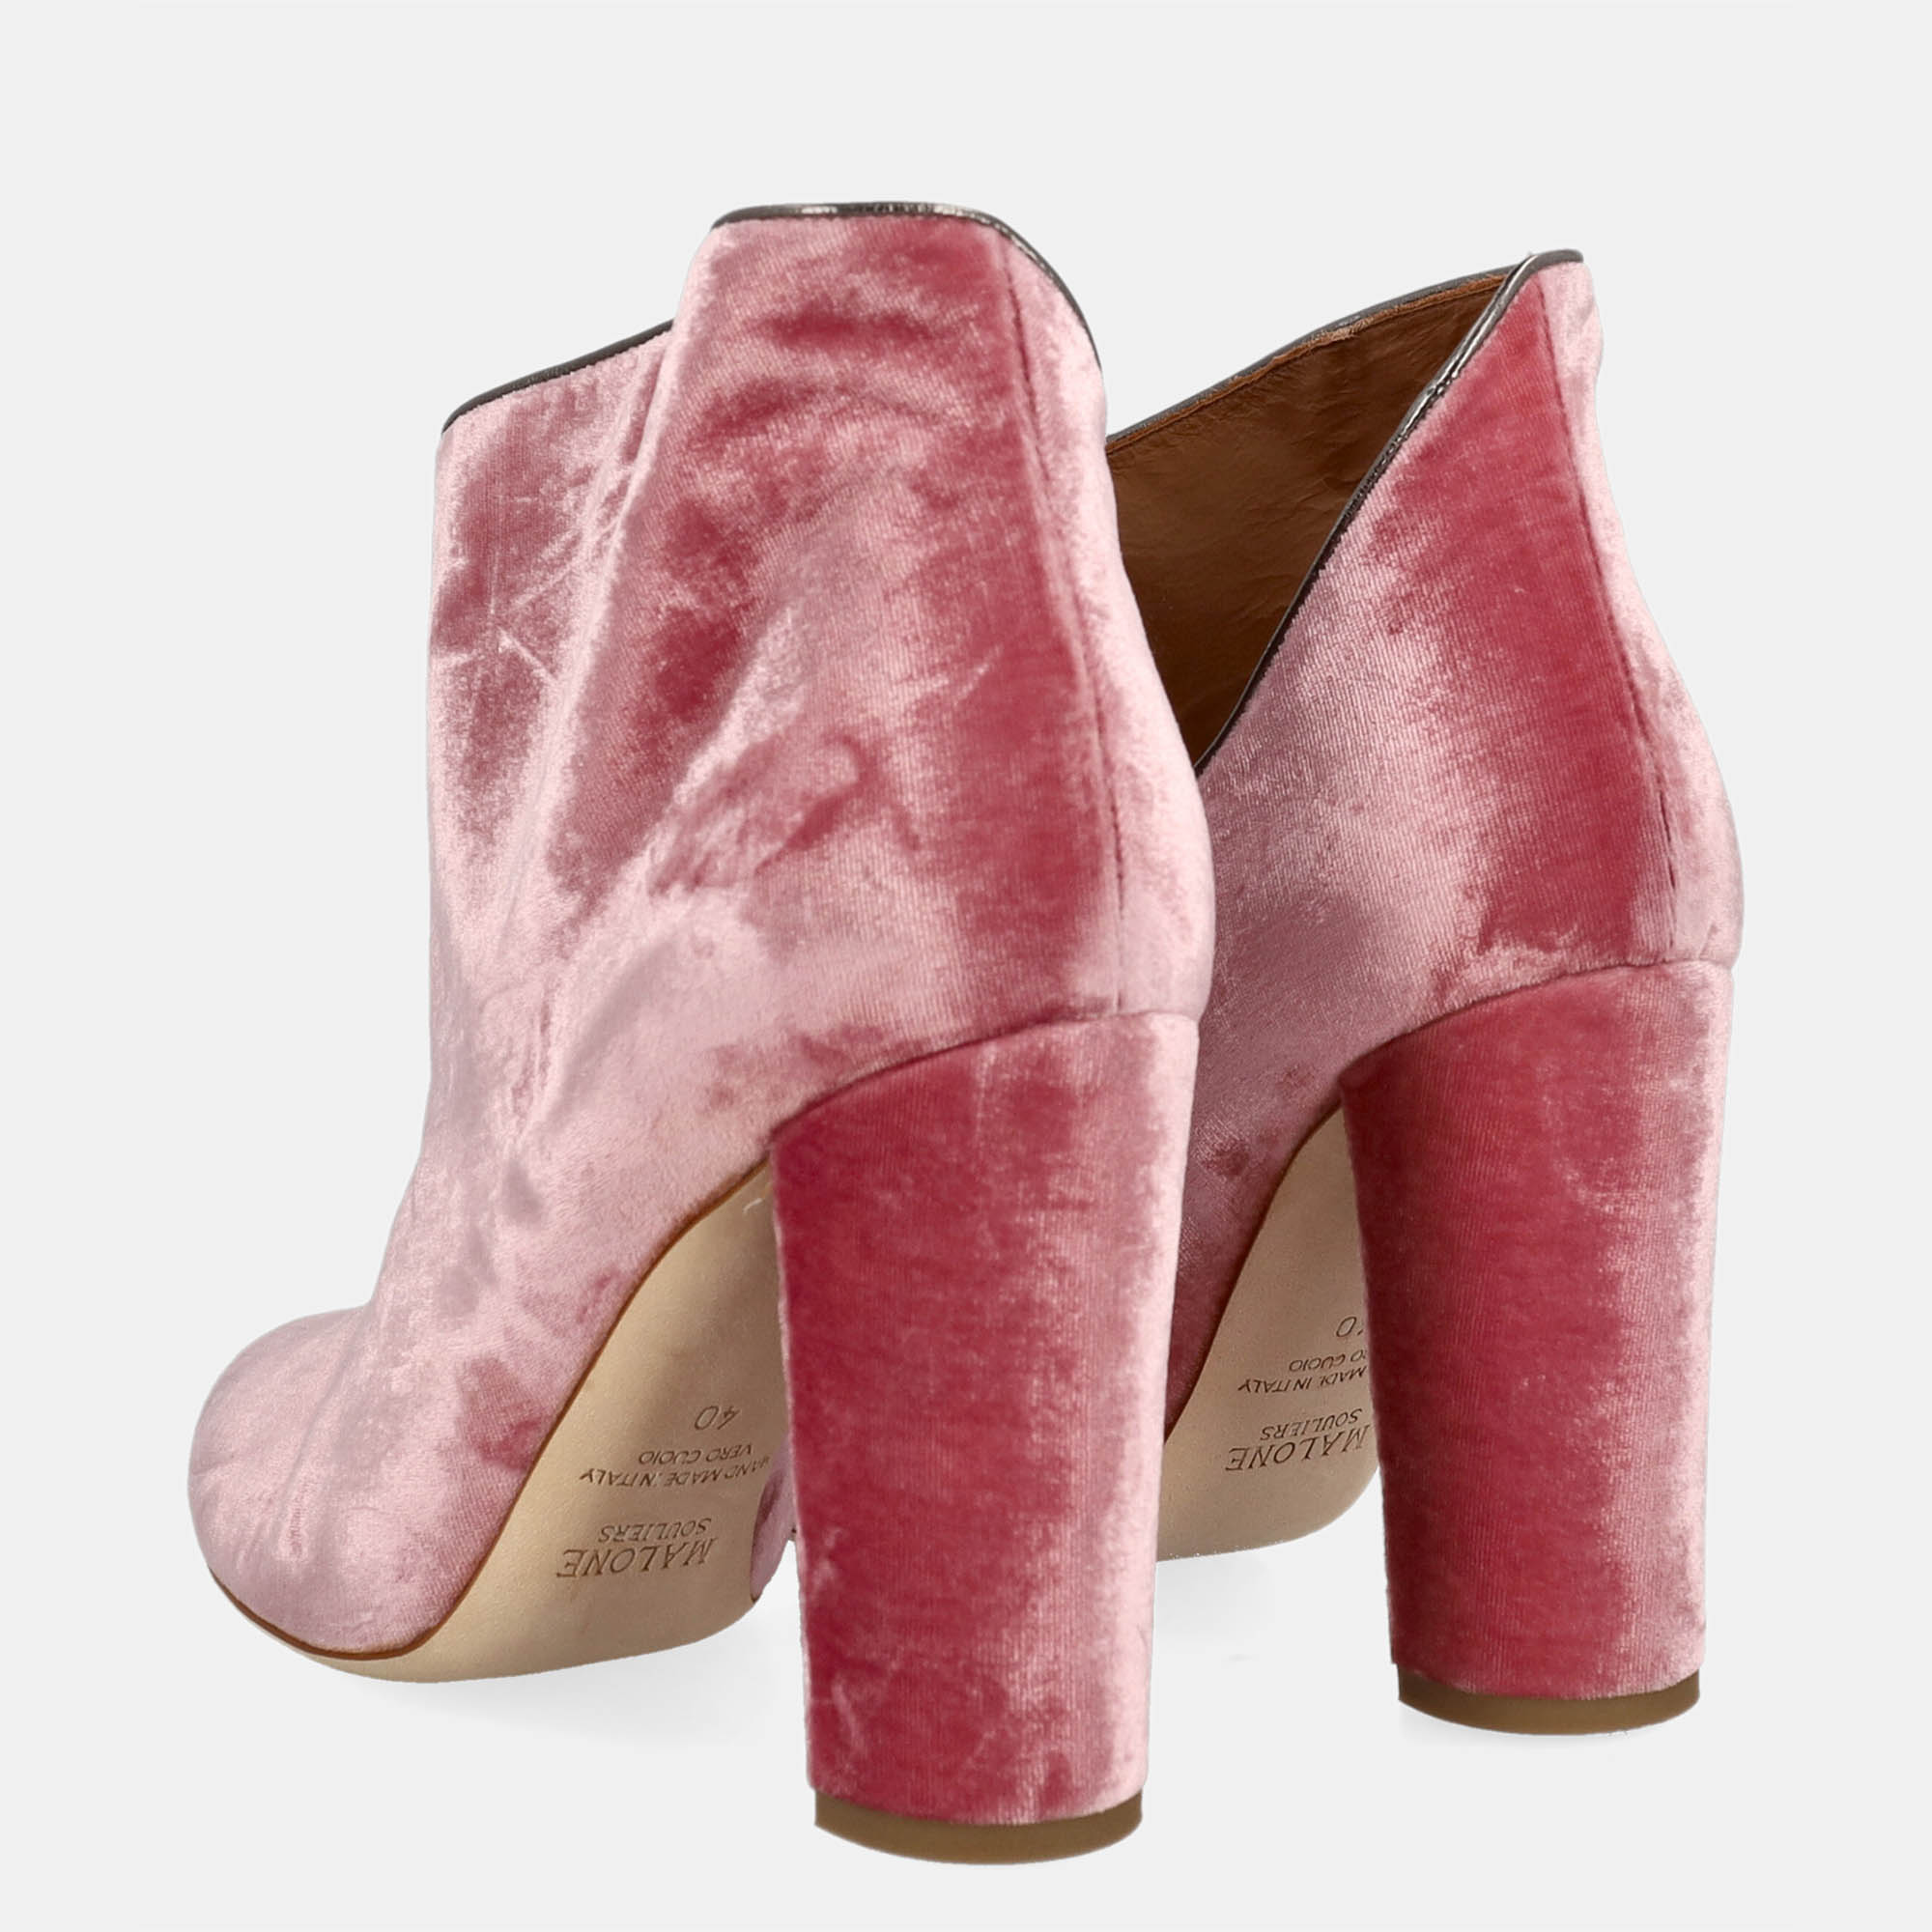 Malone Souliers  Women's Leather Ankle Boots - Pink - EU 40